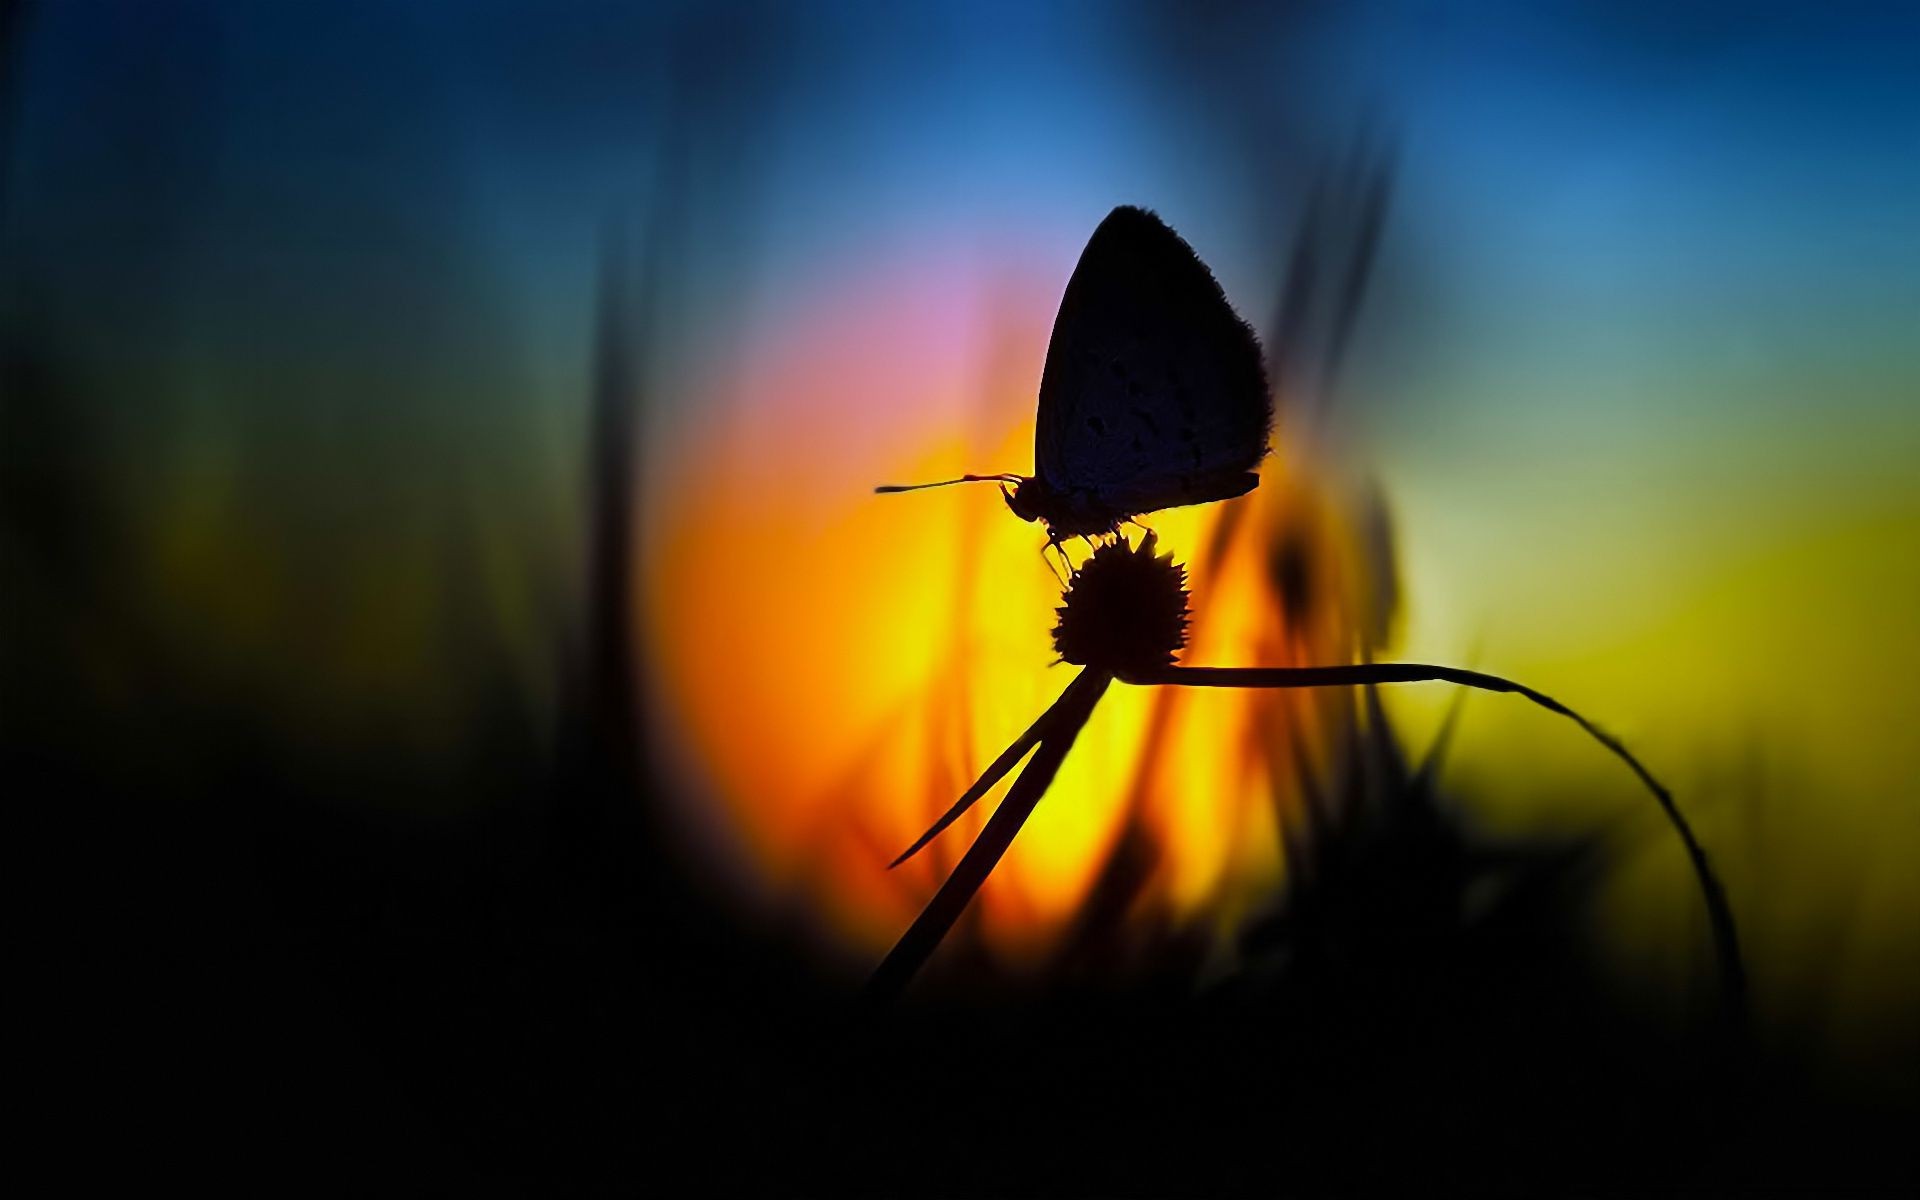 insects blur insect butterfly nature flower light sunset sun abstract focus outdoors dof